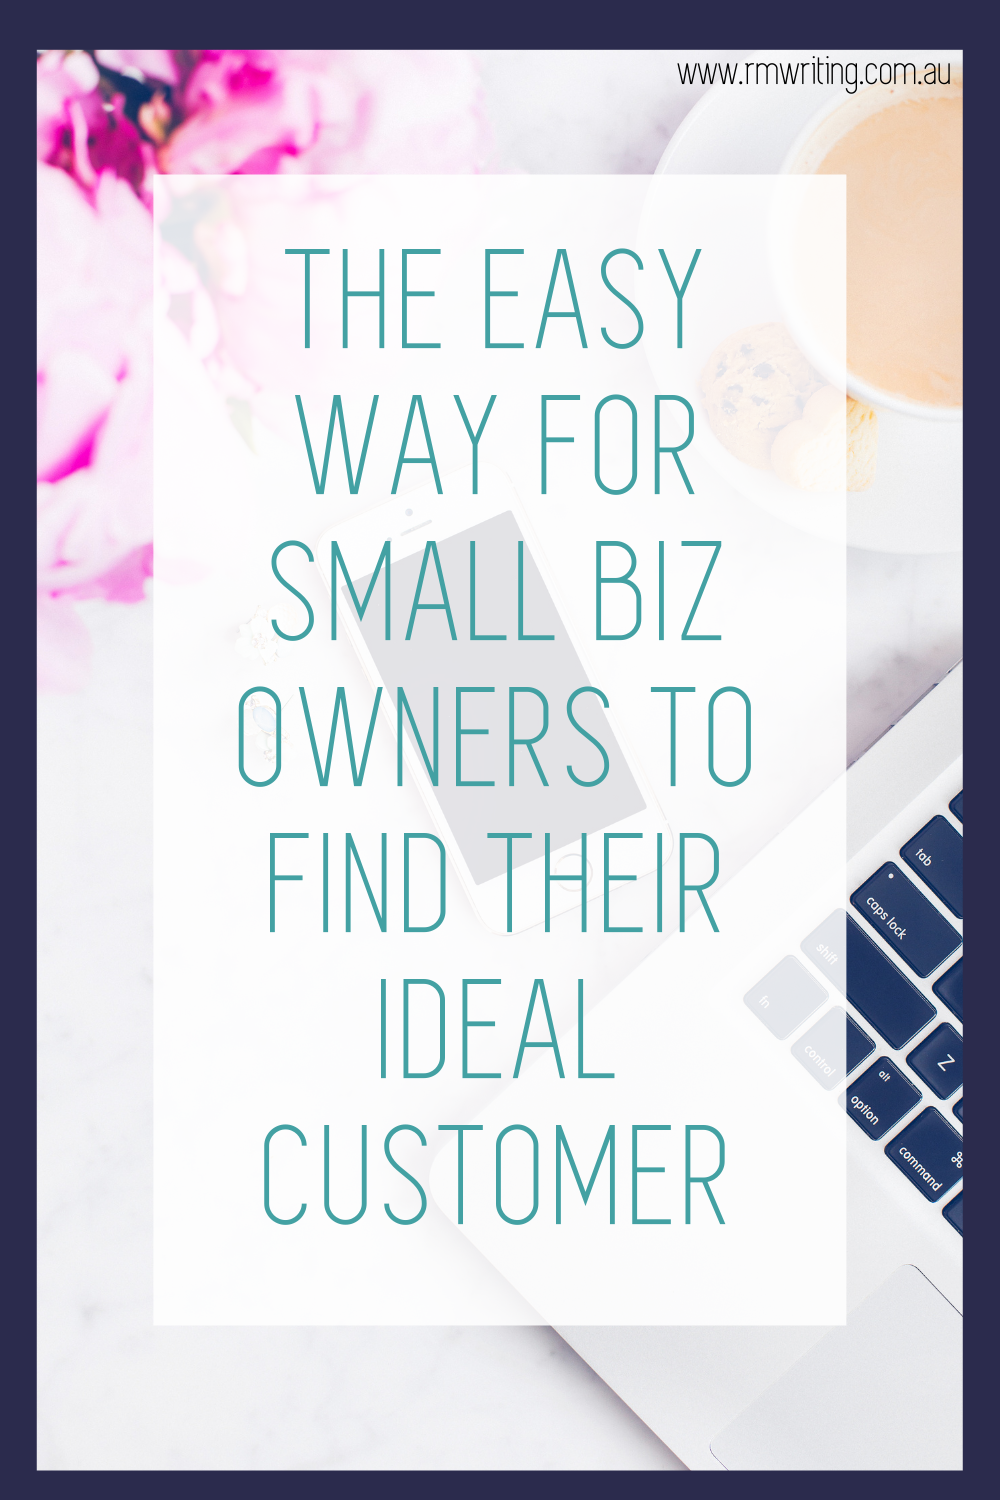 The Easy Way For Small Biz Owners To Find Their Ideal Customers